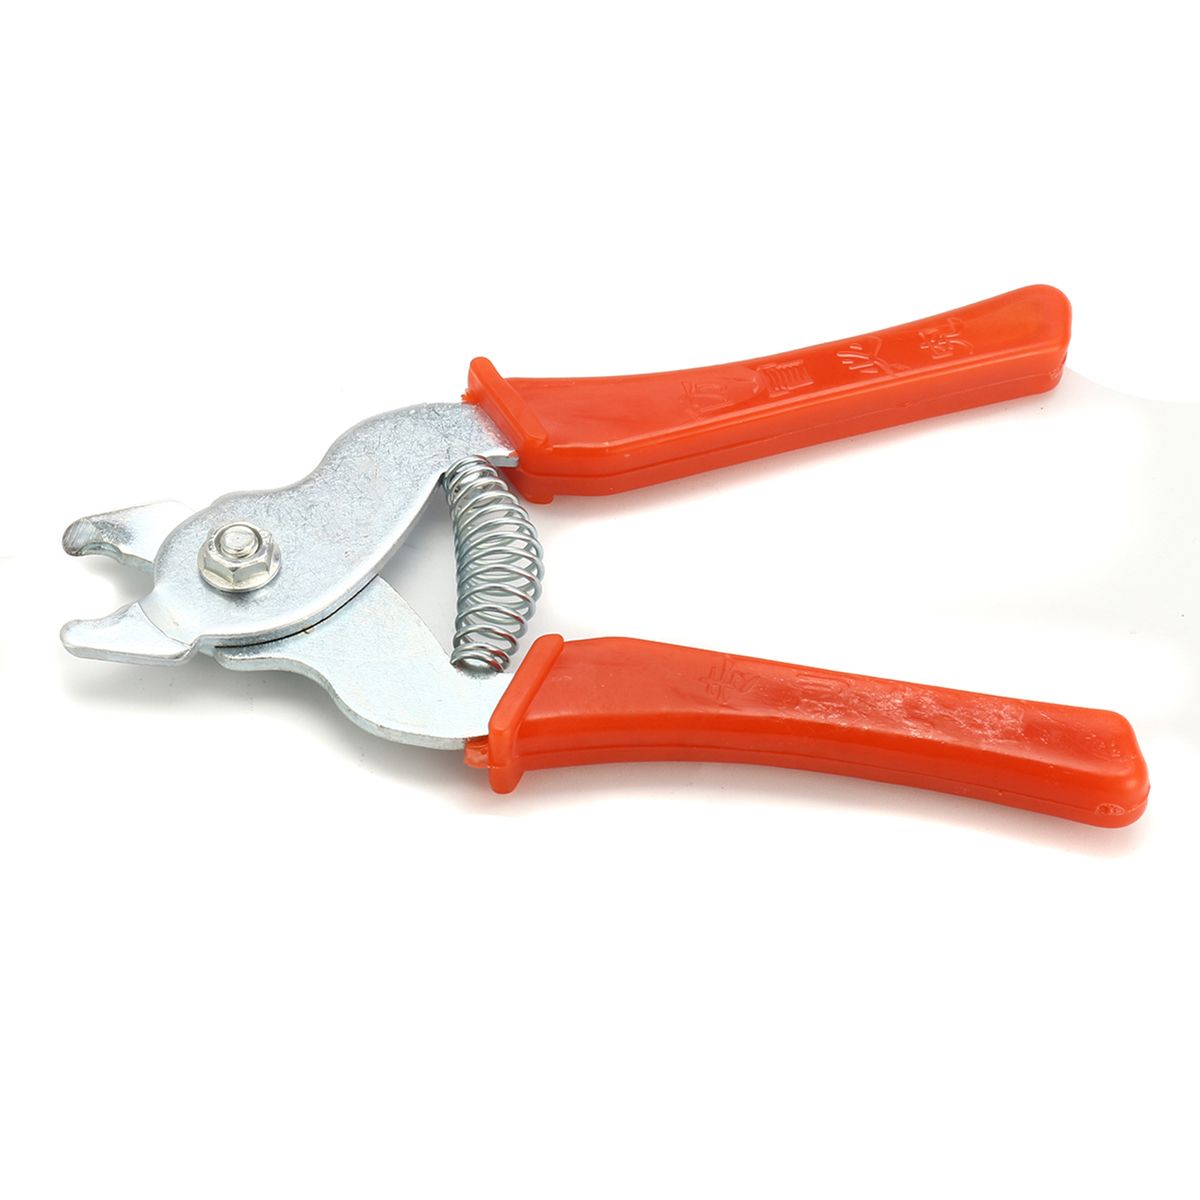 Hog-Ring-Pliers-Tool-M-Clip-Staples-Bird-Chicken-Mesh-Cage-Wire-Fencing-Netting-1316667